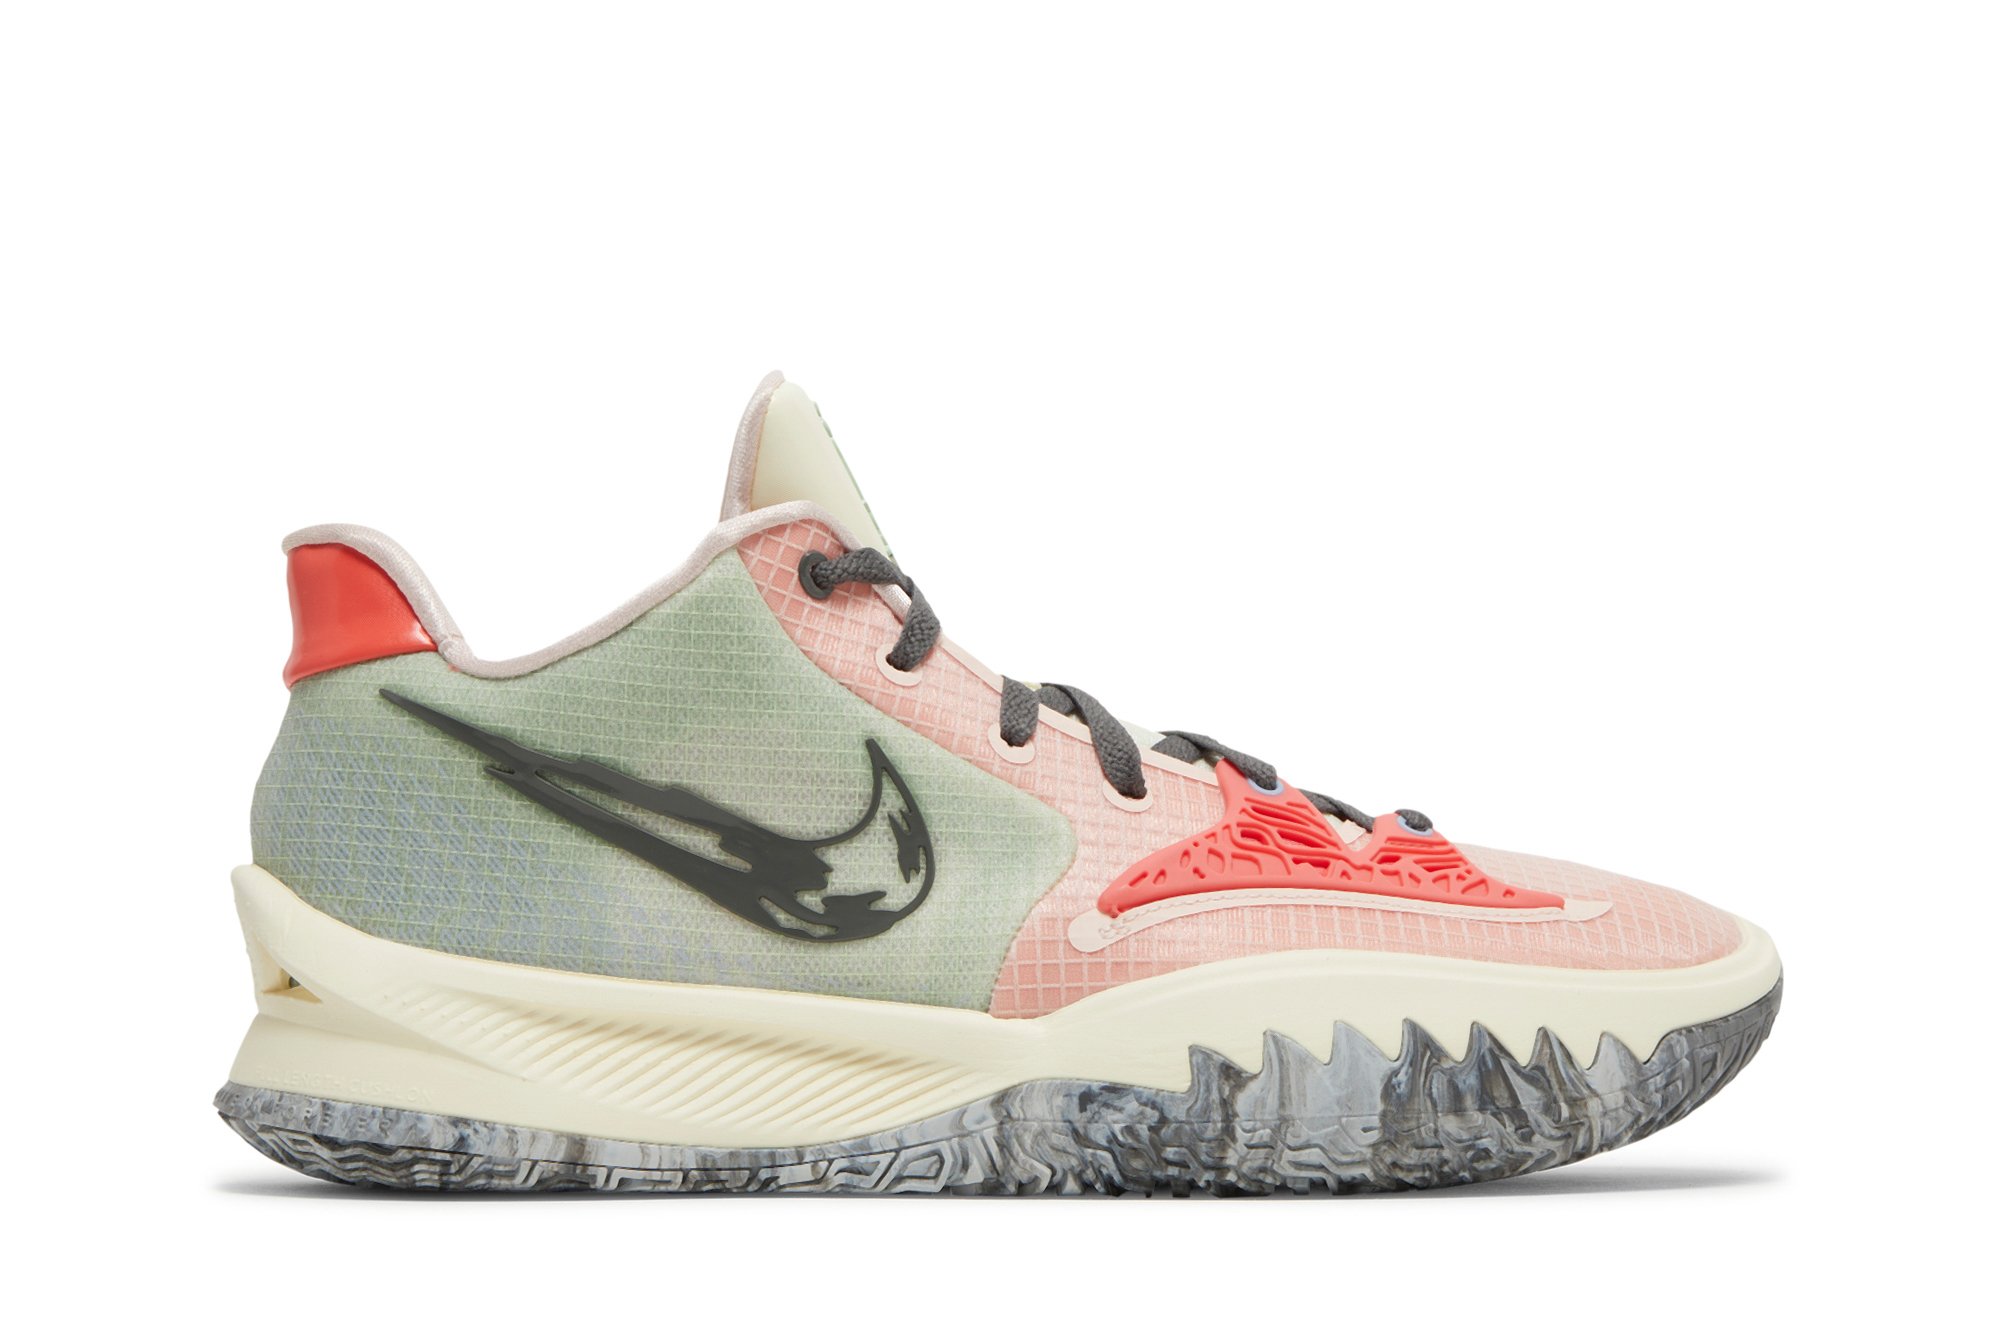 Kyrie Low 4 EP 'Pale Coral'